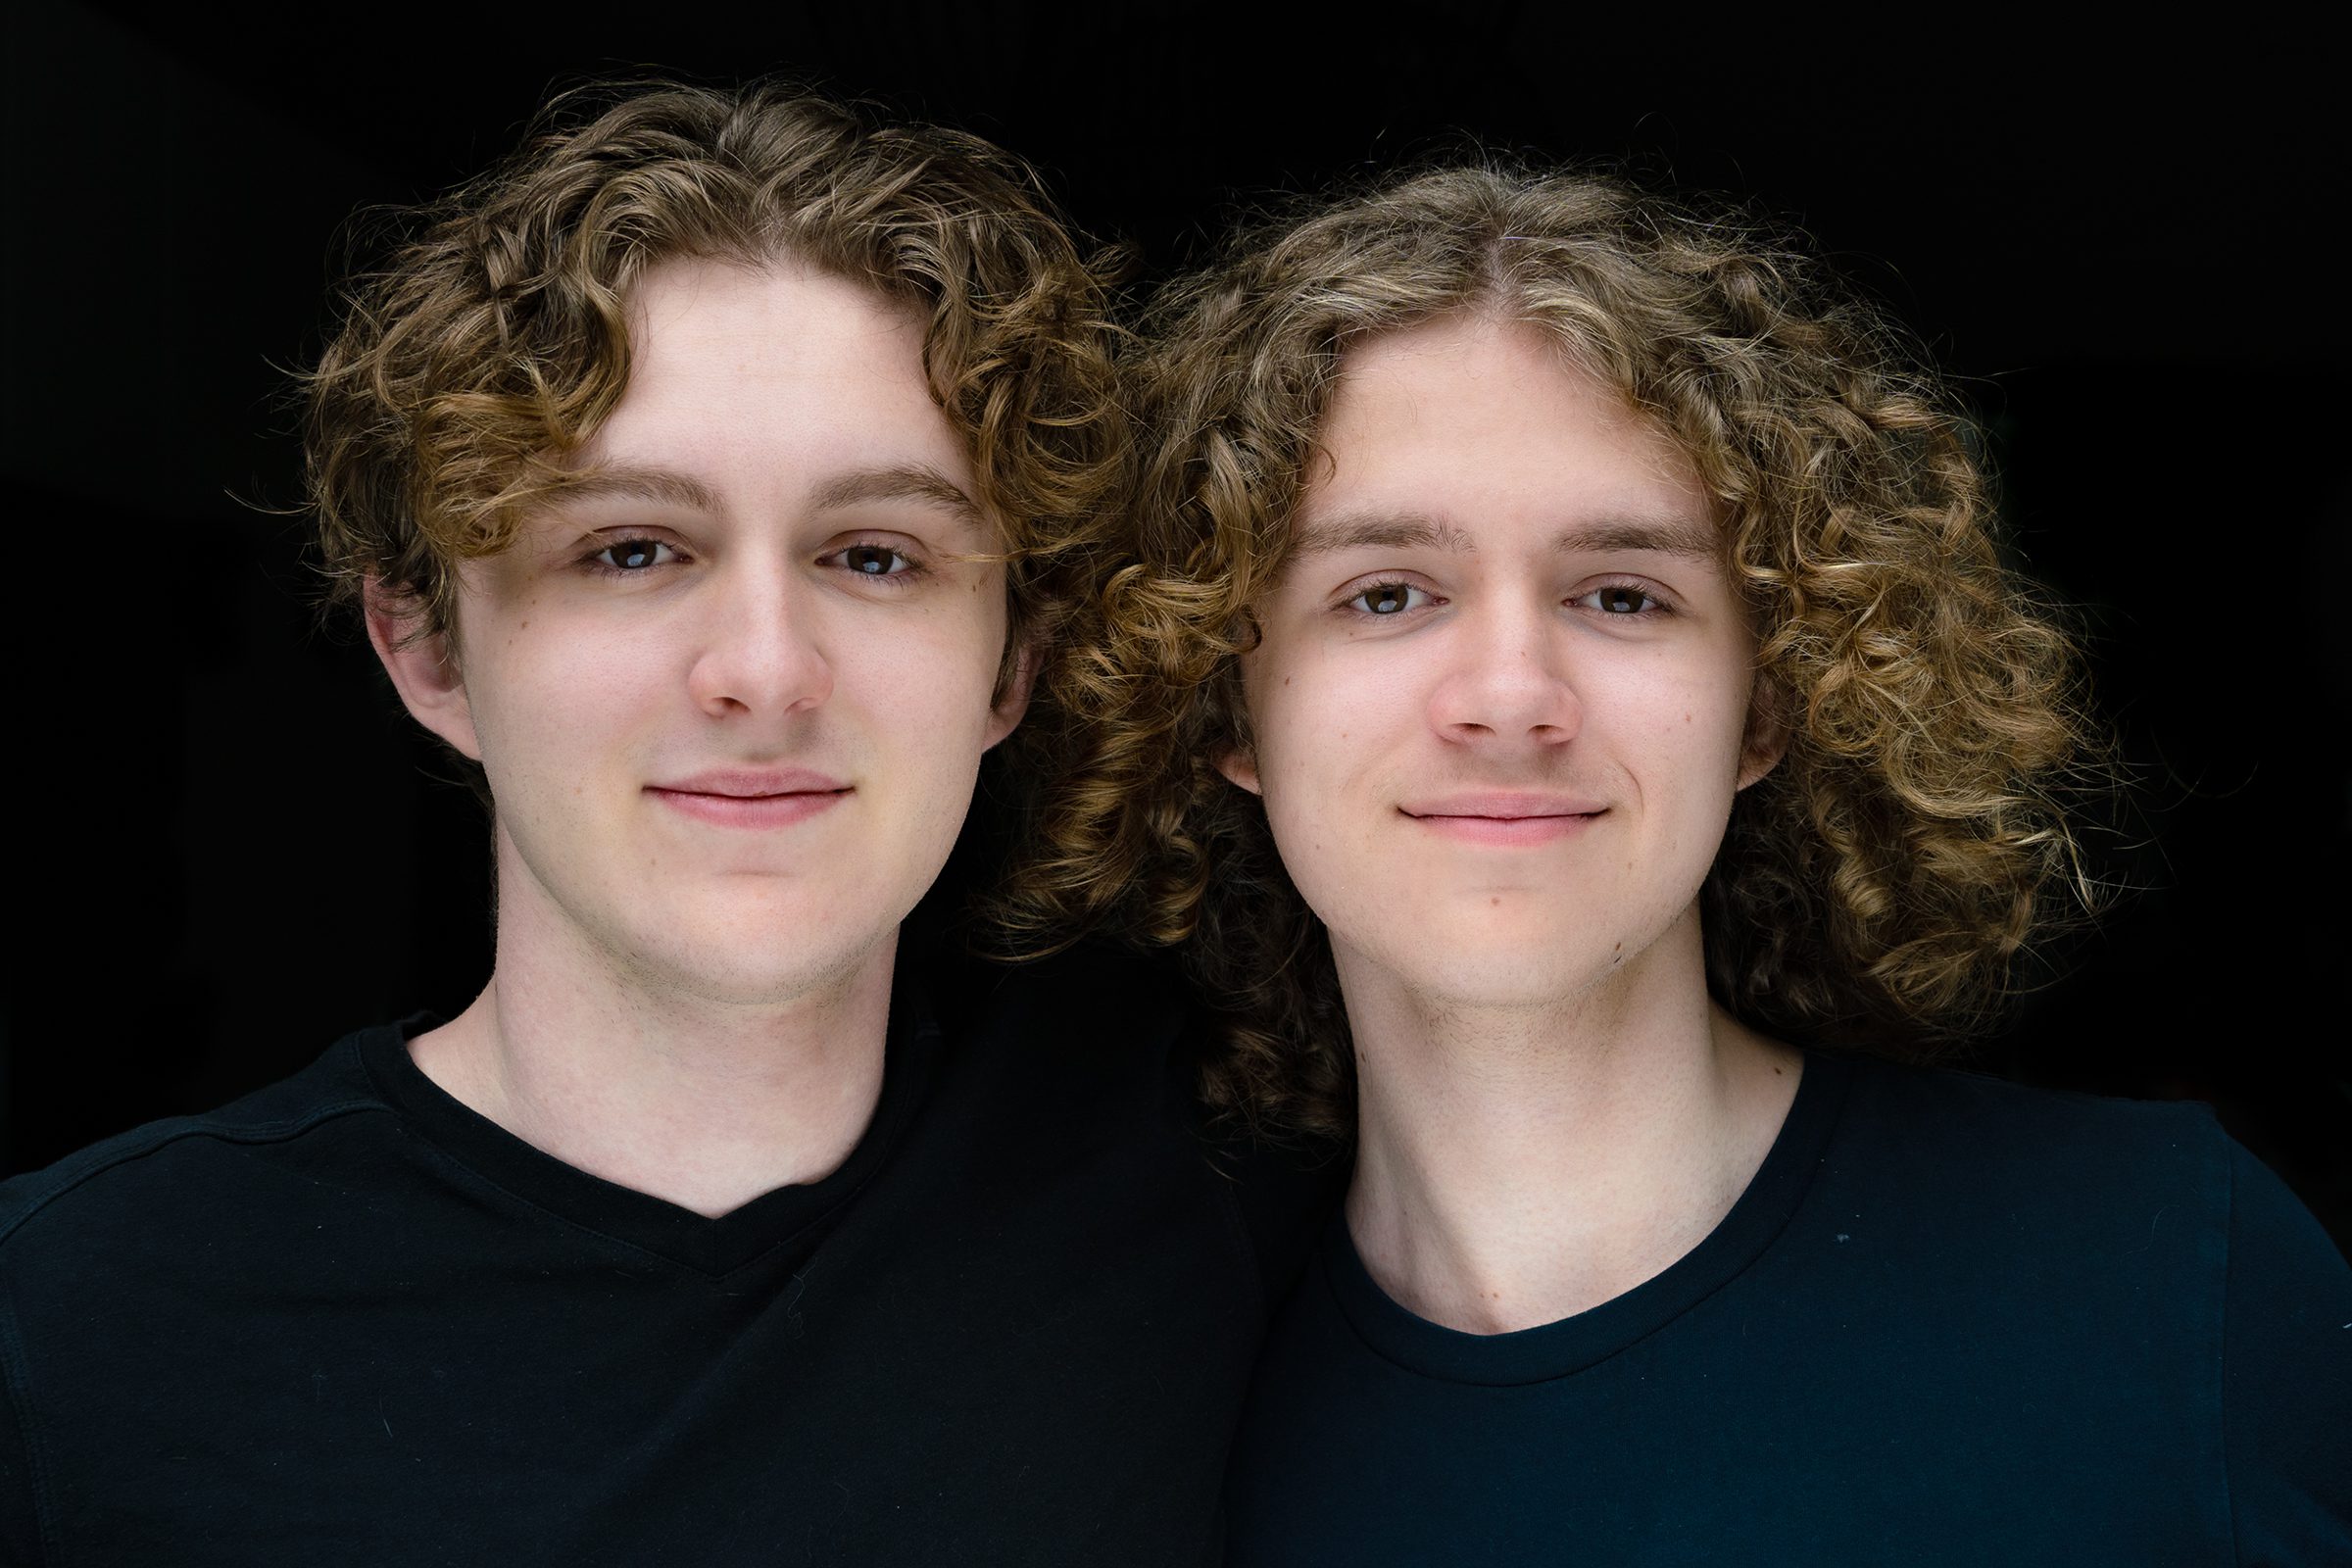 portraits of young teenage brothers with blonde curly hair looking directly at the camera standing side by side